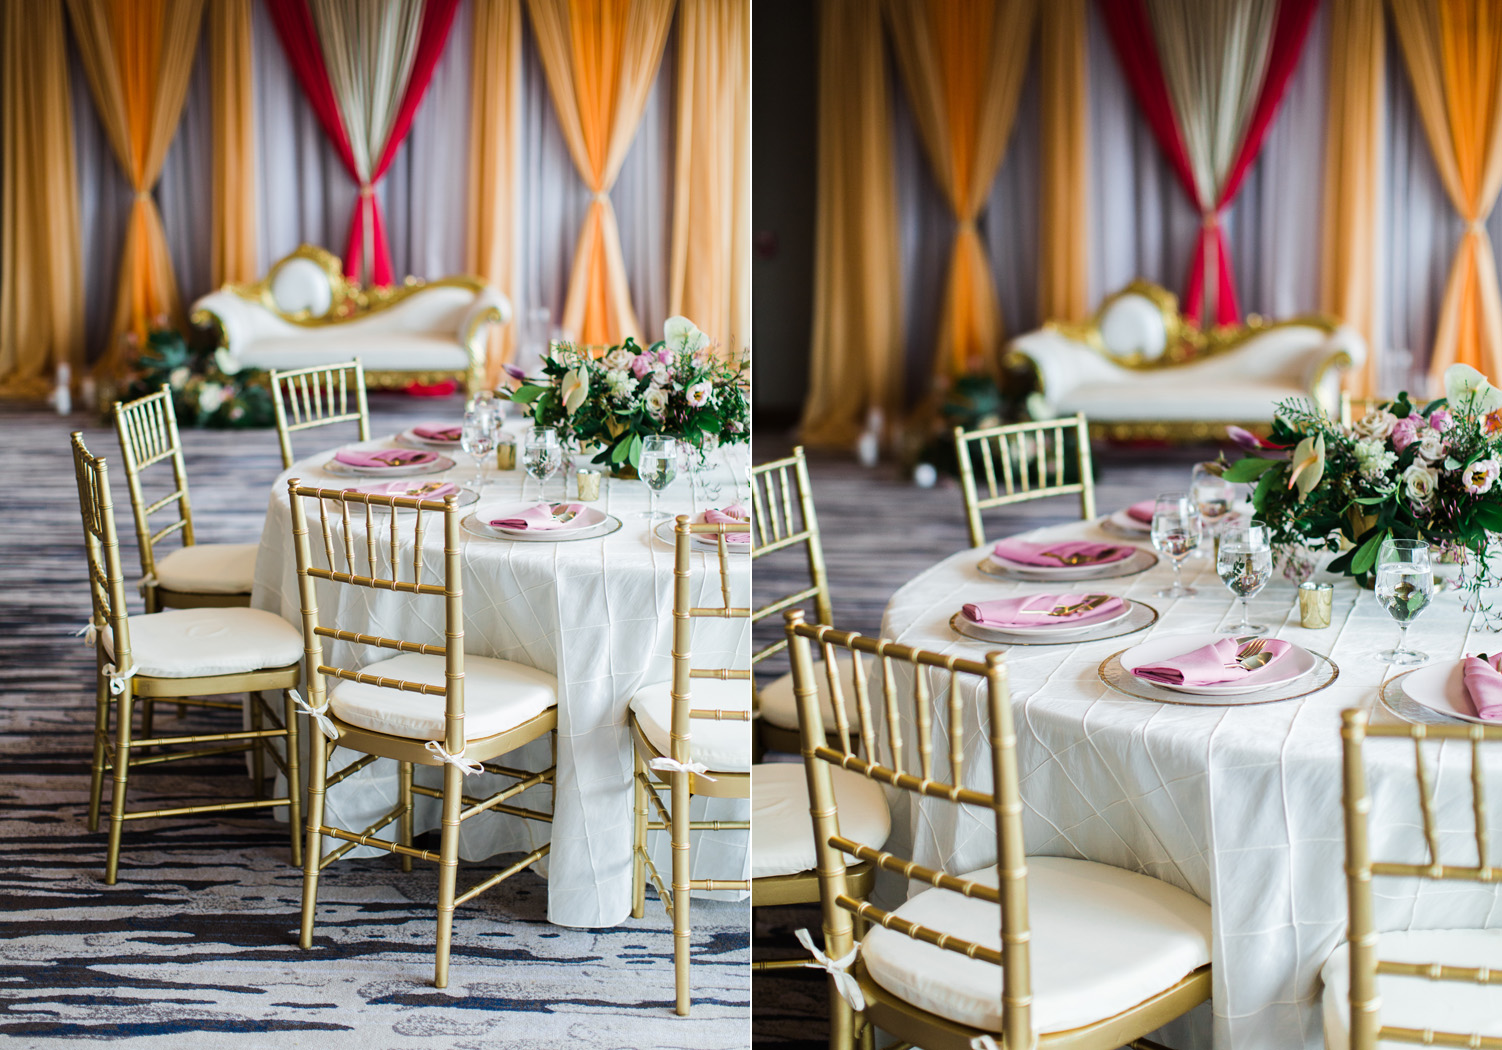 Alexandra Knight Photography Seattle Indian Wedding Photography orange and red mandap with tropical pink table decor.jpg